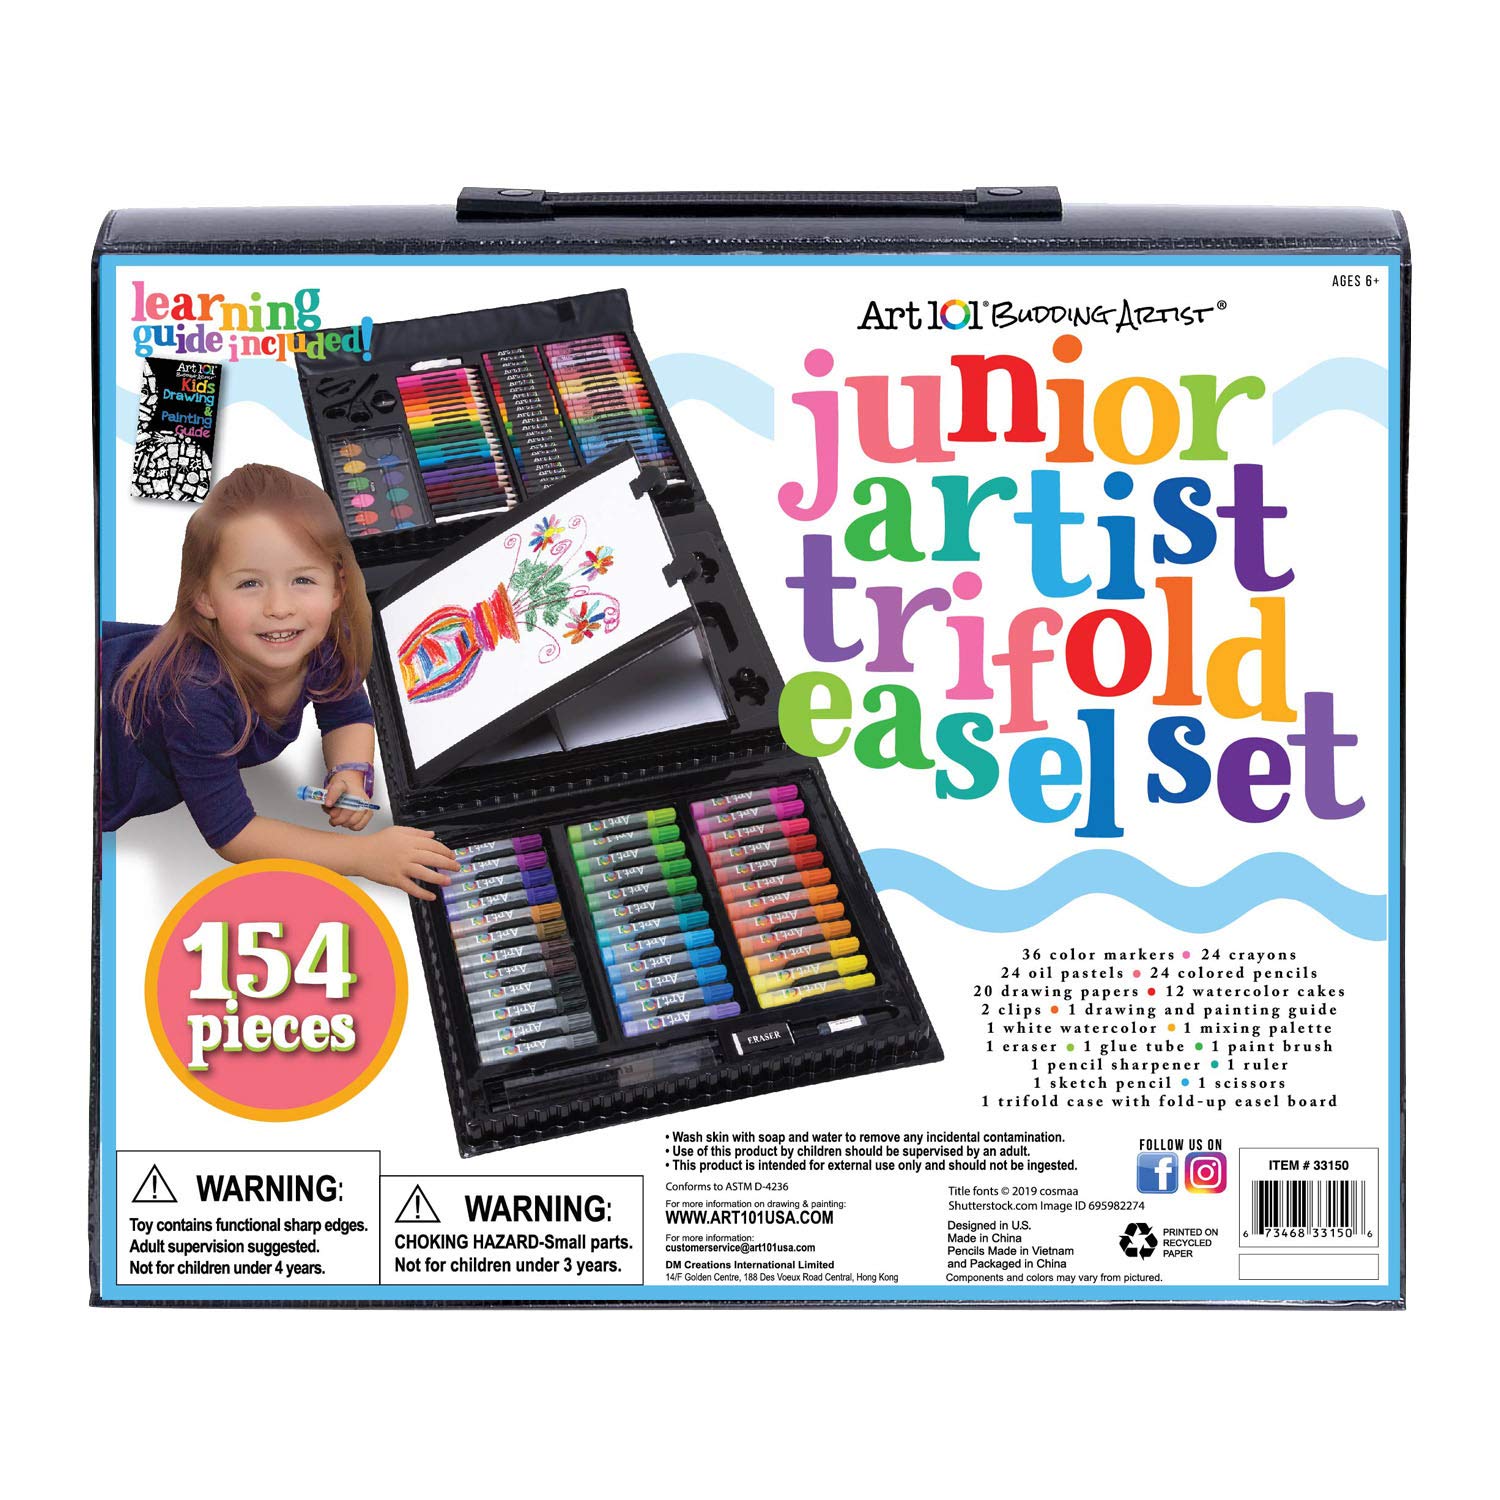 Art 101 USA Budding Artist 154 Pc Junior Artist Trifold Easel Art Set, Includes markers, crayons, oil pastels, watercolor paints, and colored pencils, Case includes pop up easel, Portable Art Studio , White